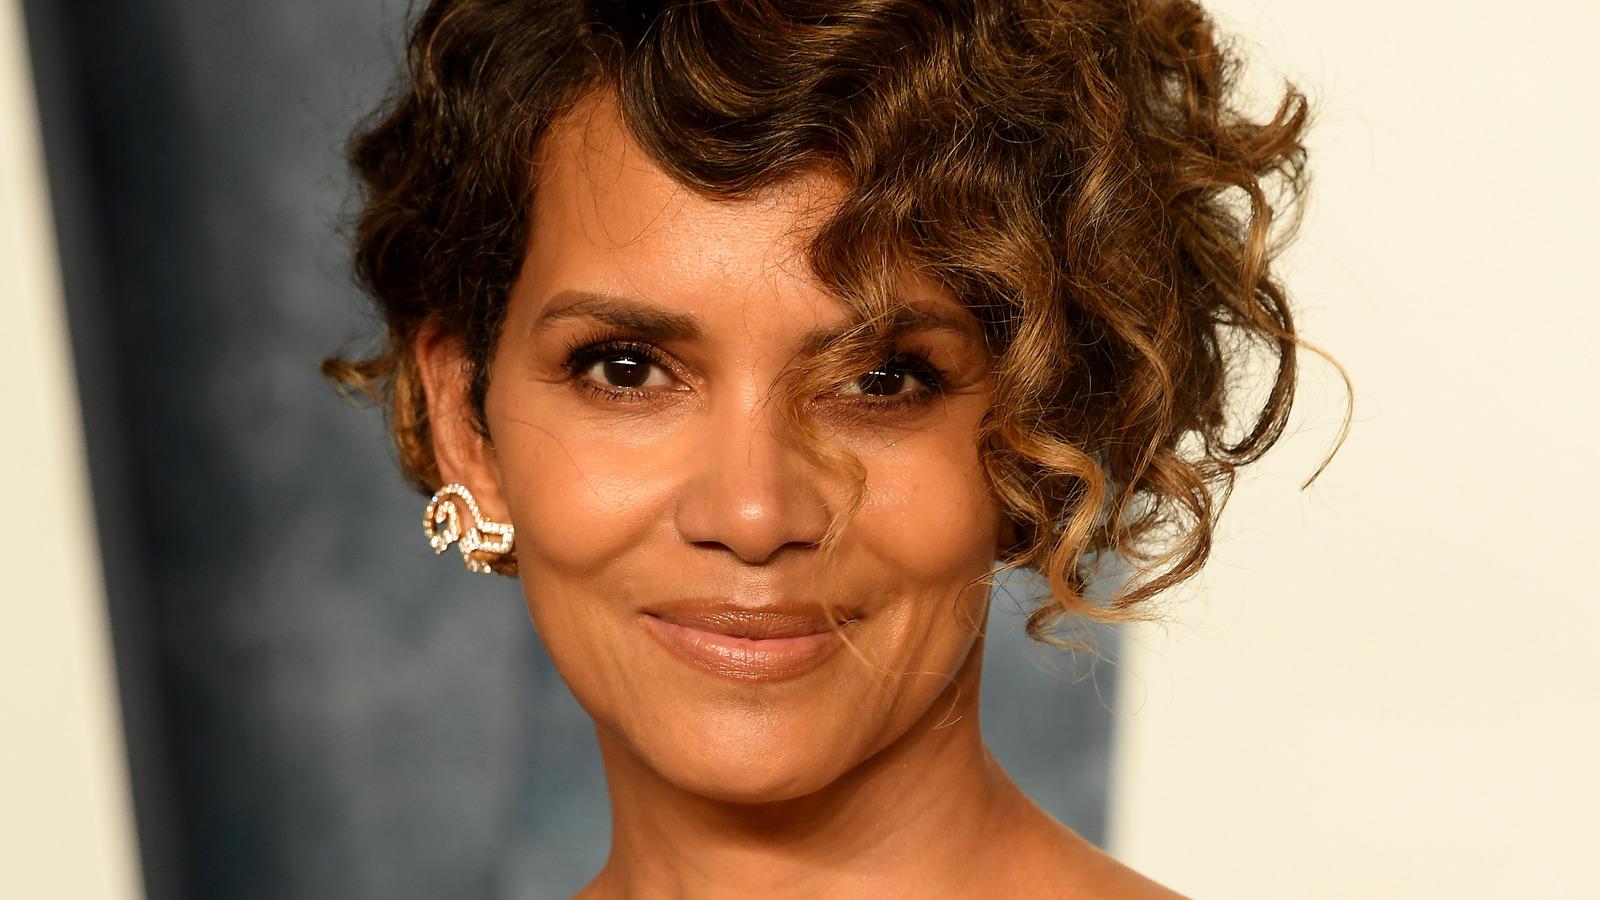 Halle Berry will speak at the Red Sea International Film Festival